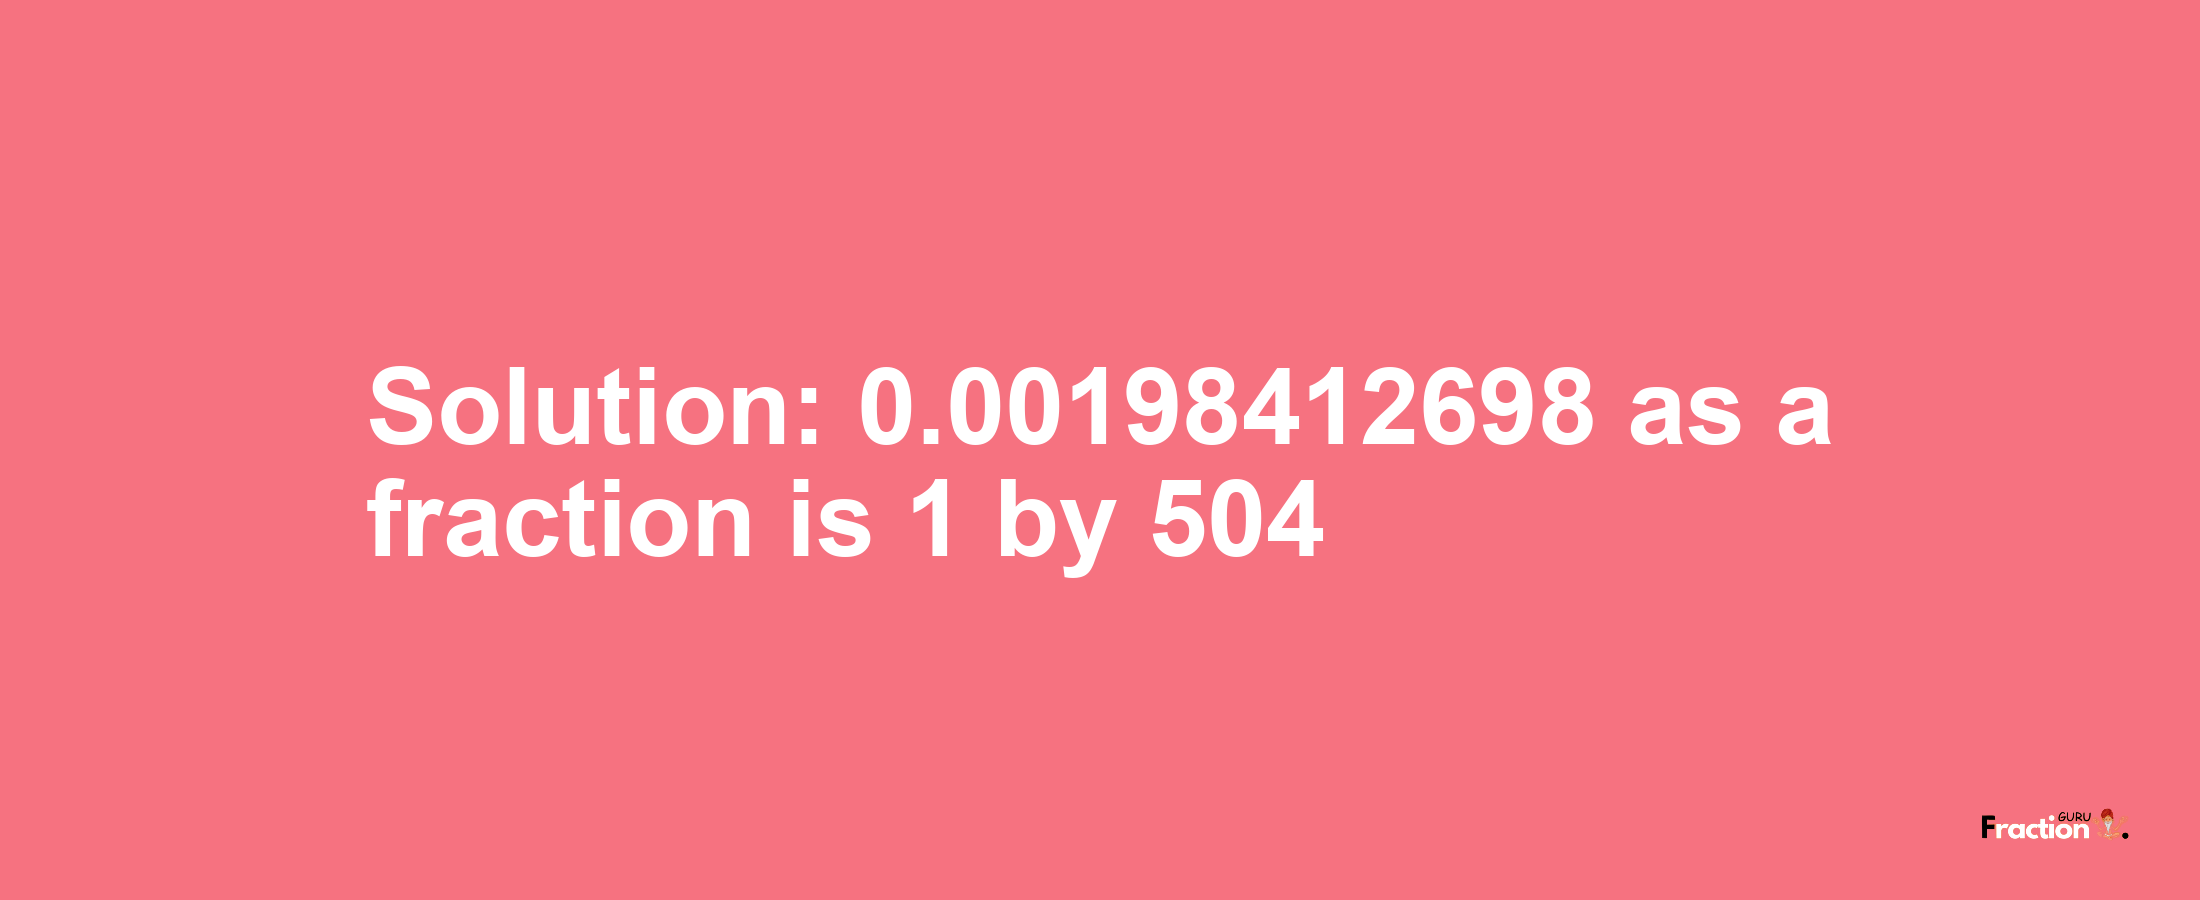 Solution:0.00198412698 as a fraction is 1/504